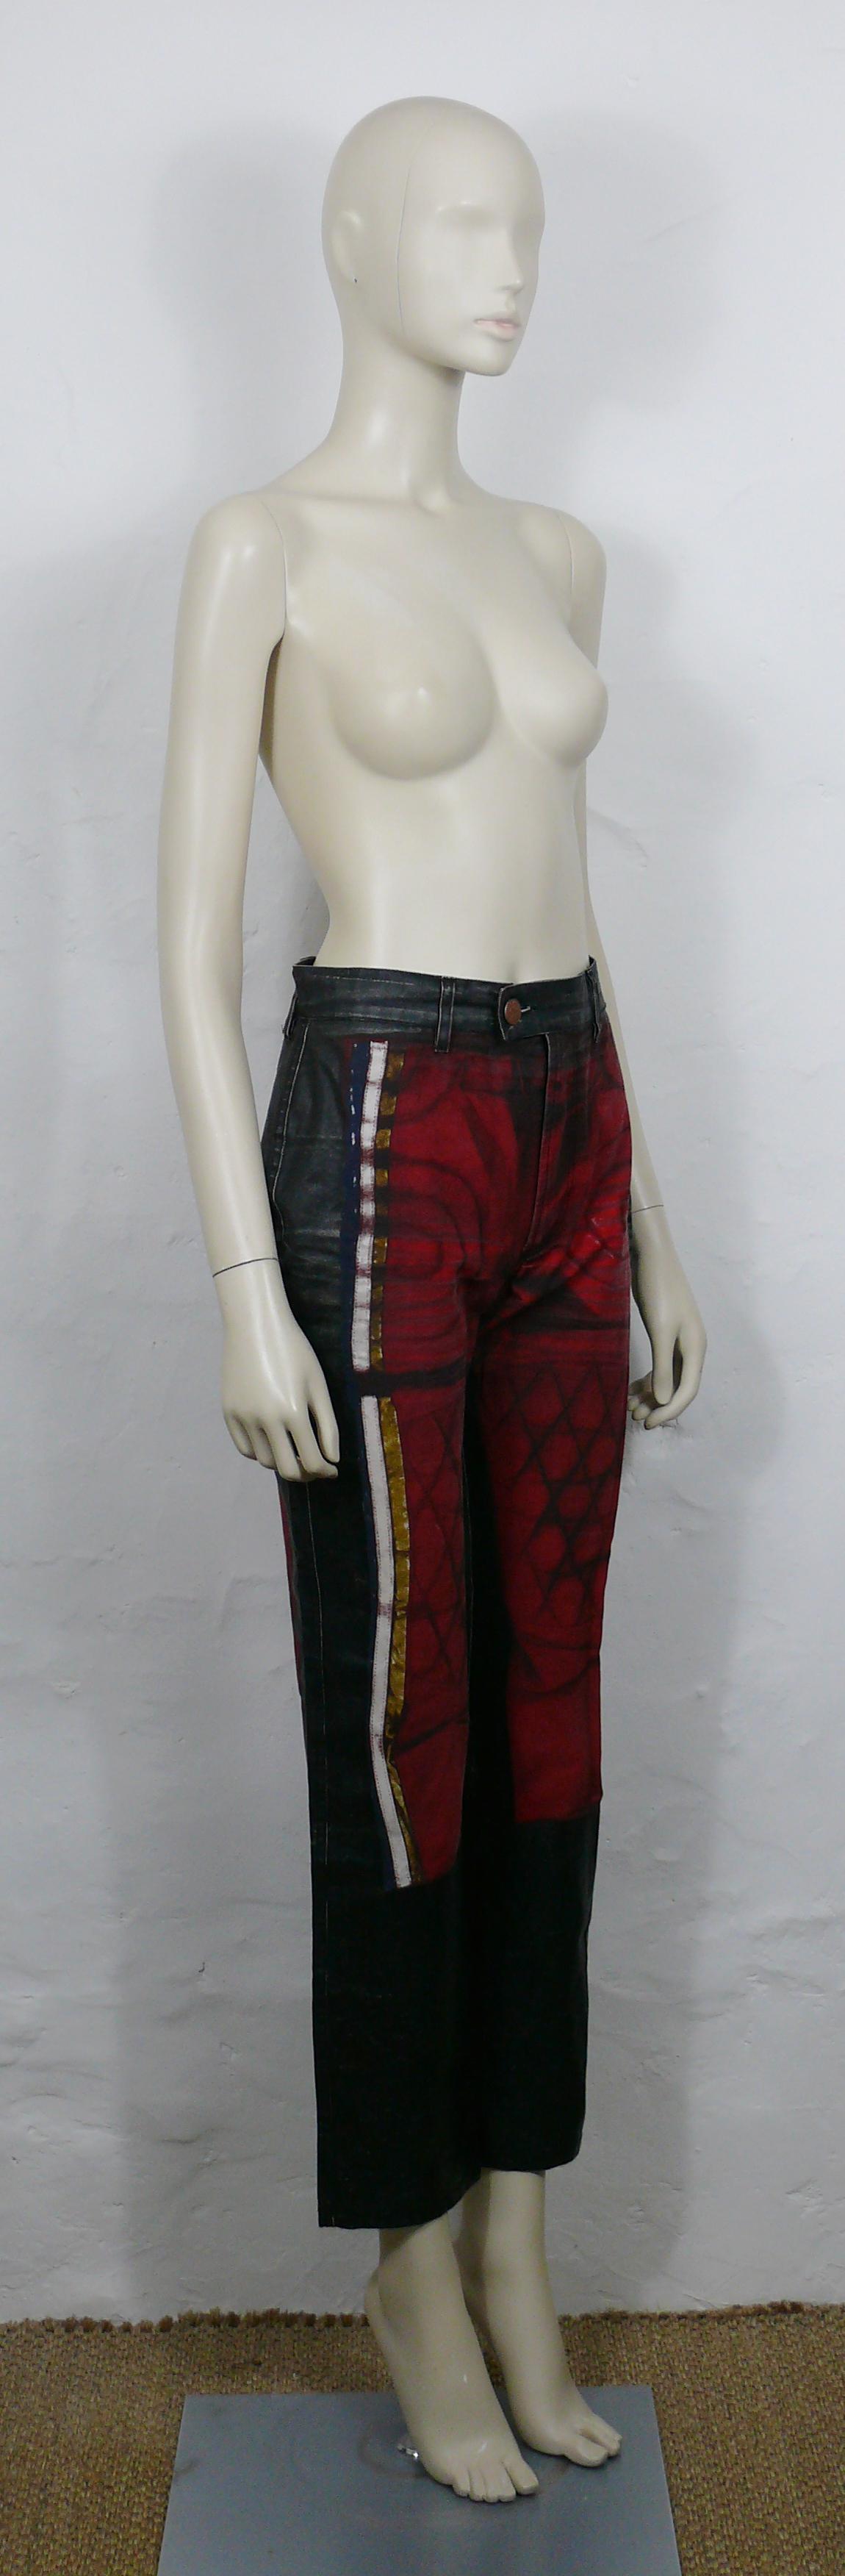 JEAN PAUL GAULTIER vintage coated denim pants trousers featuring a motorcycle jeans pattern trompe l'œil on front and back.

These trousers feature :
- Black coated denim trousers featuring a red motorcycle jeans pattern trompe l'œil on front and